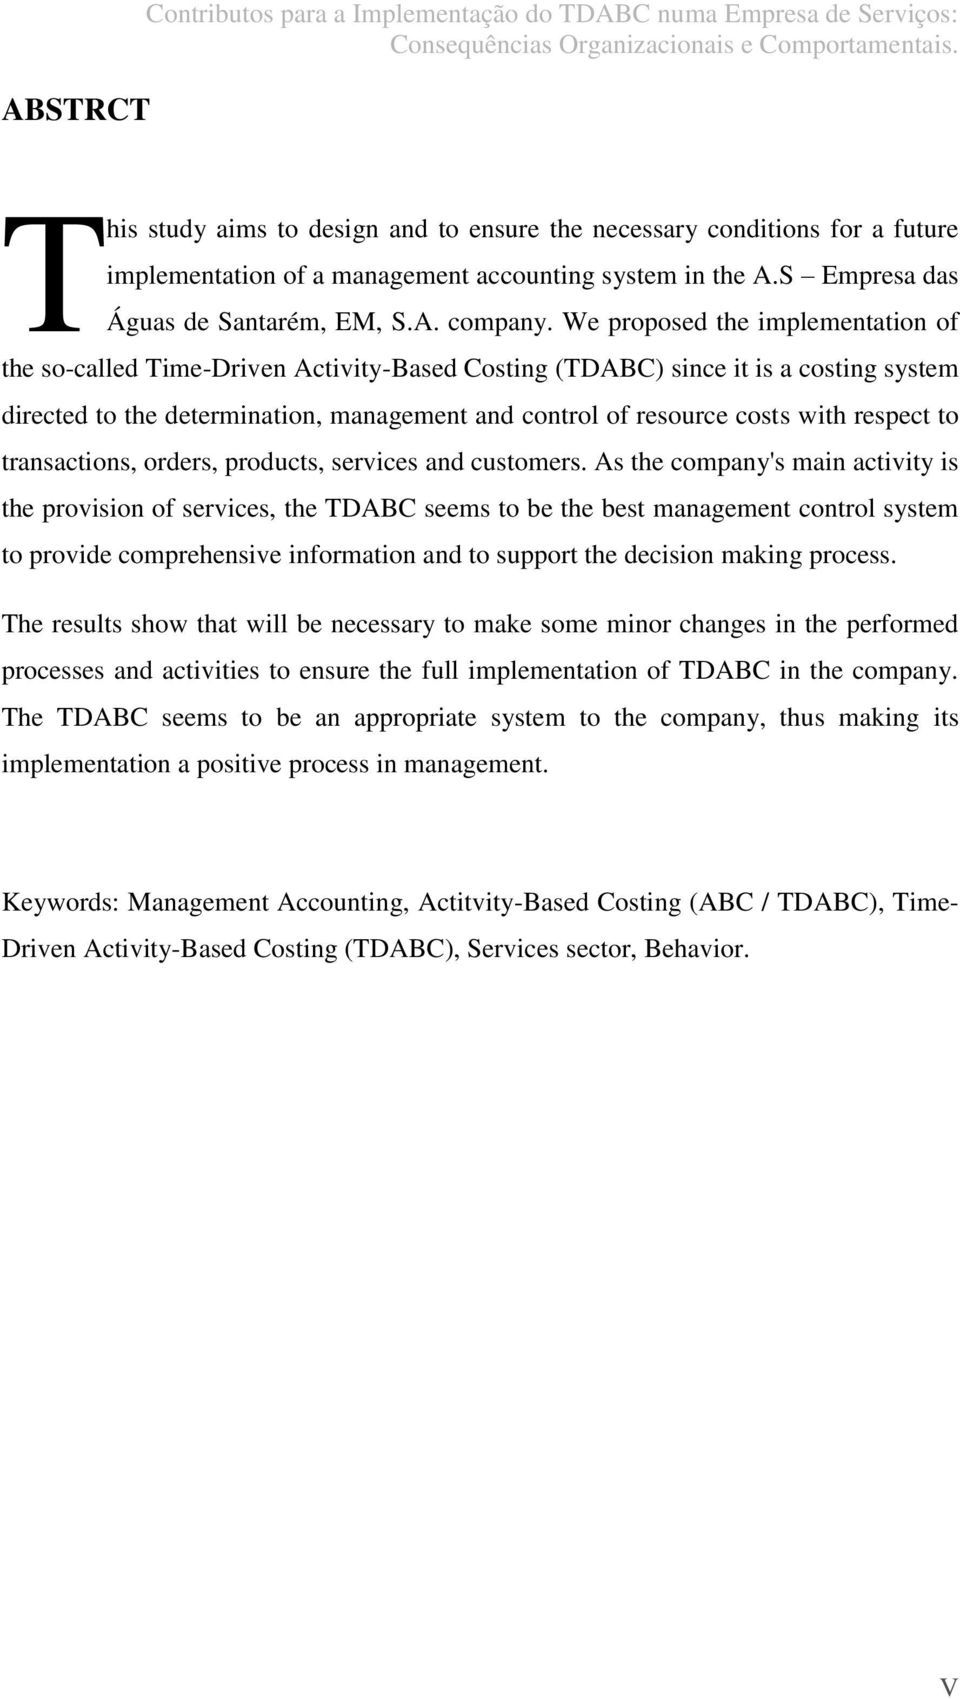 We proposed the implementation of the so-called Time-Driven Activity-Based Costing (TDABC) since it is a costing system directed to the determination, management and control of resource costs with